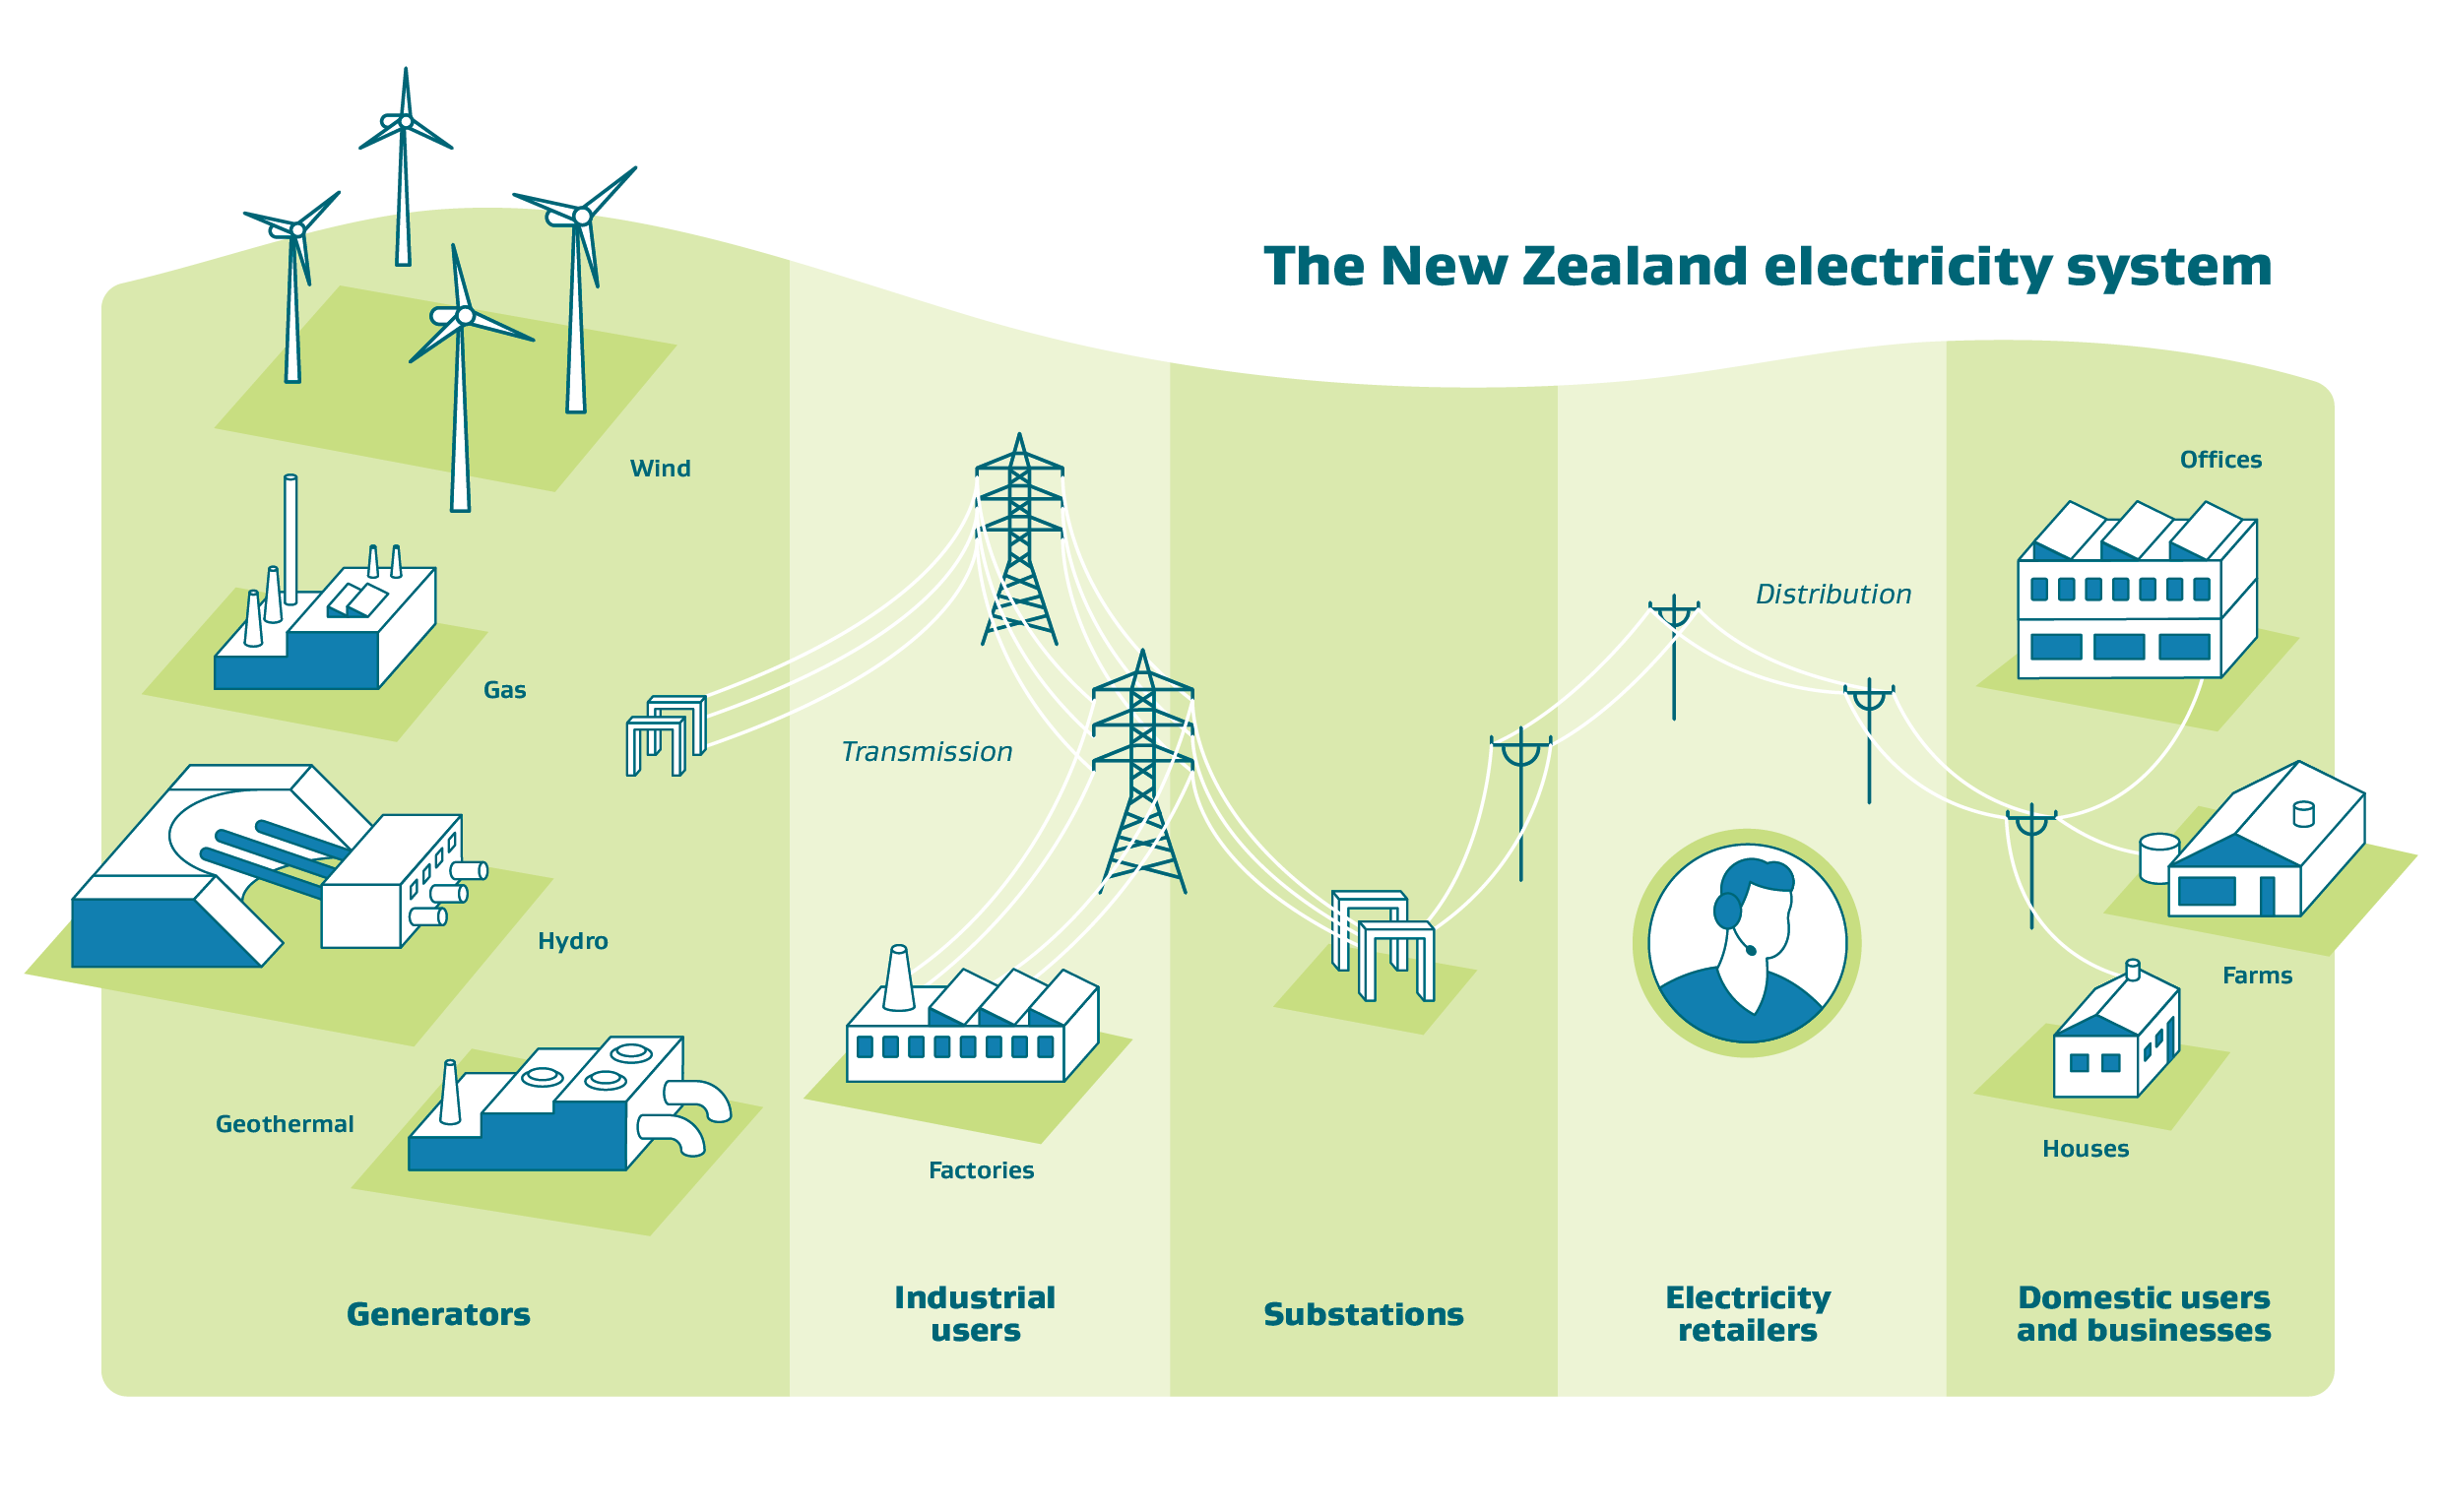 The New Zealand electricity system diagram